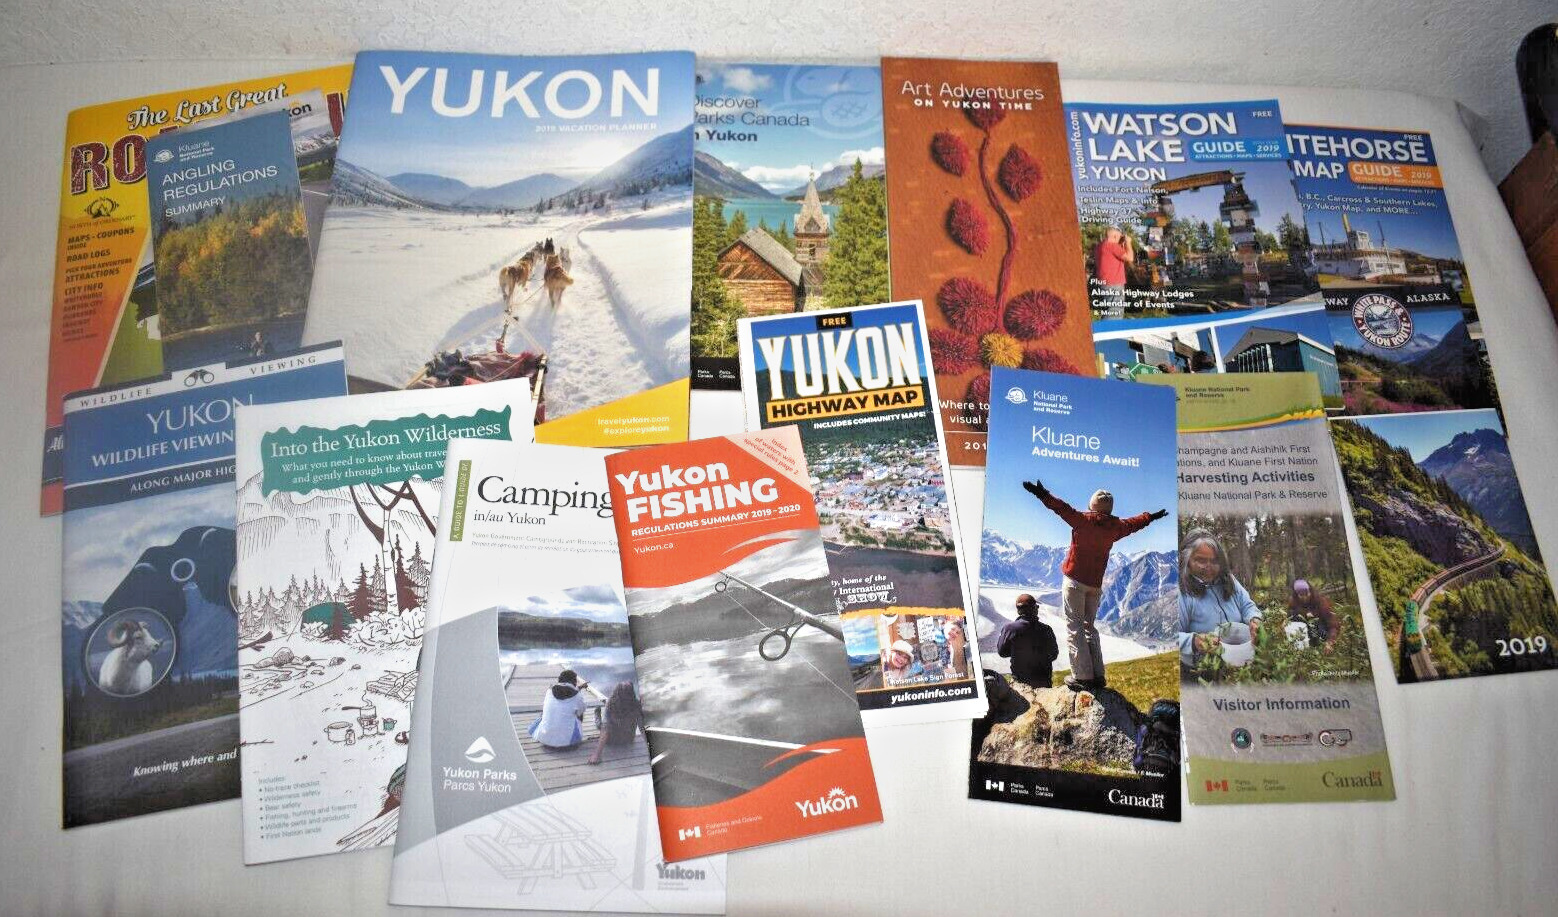 Canada\'s Yukon Territory - Road Maps Guides Brochures Lot of 16 from 2019